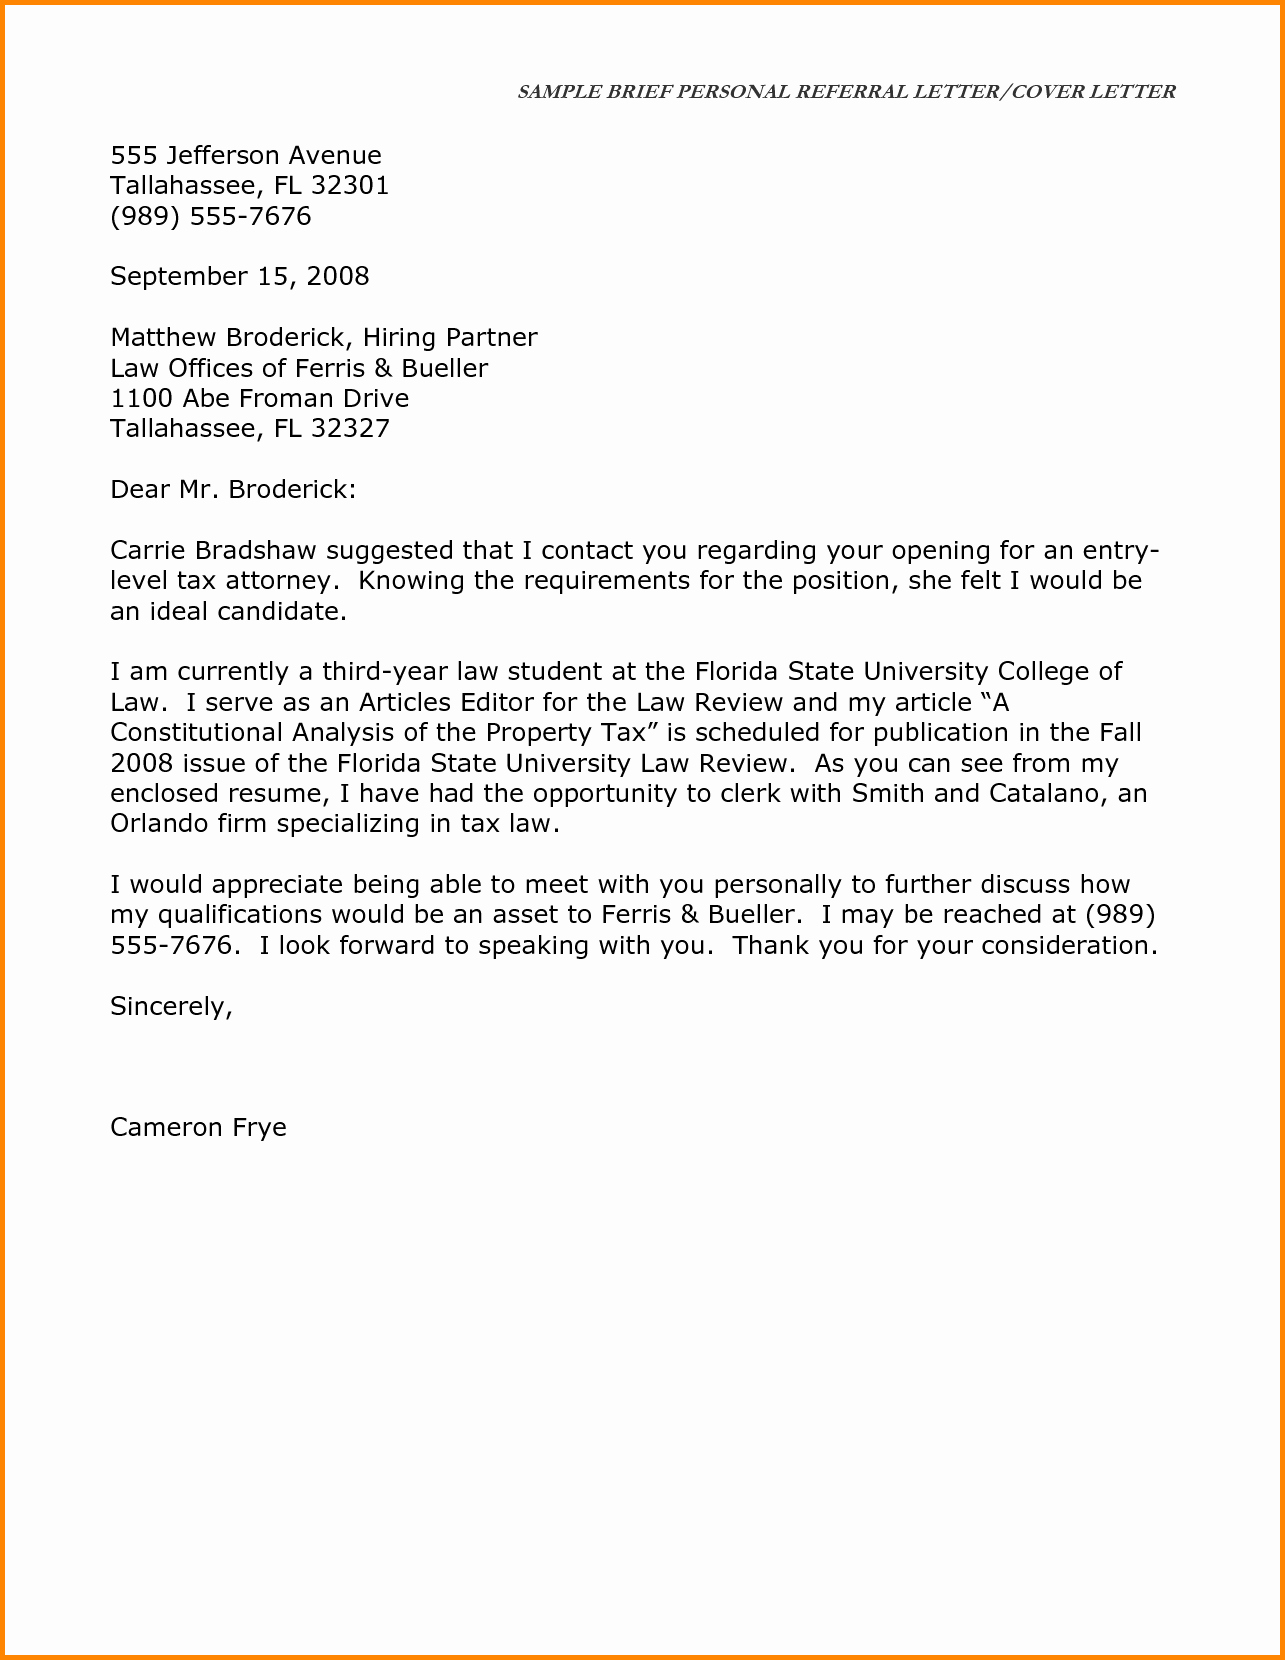 Referral Letter Sample for Employment Beautiful Employee Referral Cover Letter Writefiction581 Web Fc2